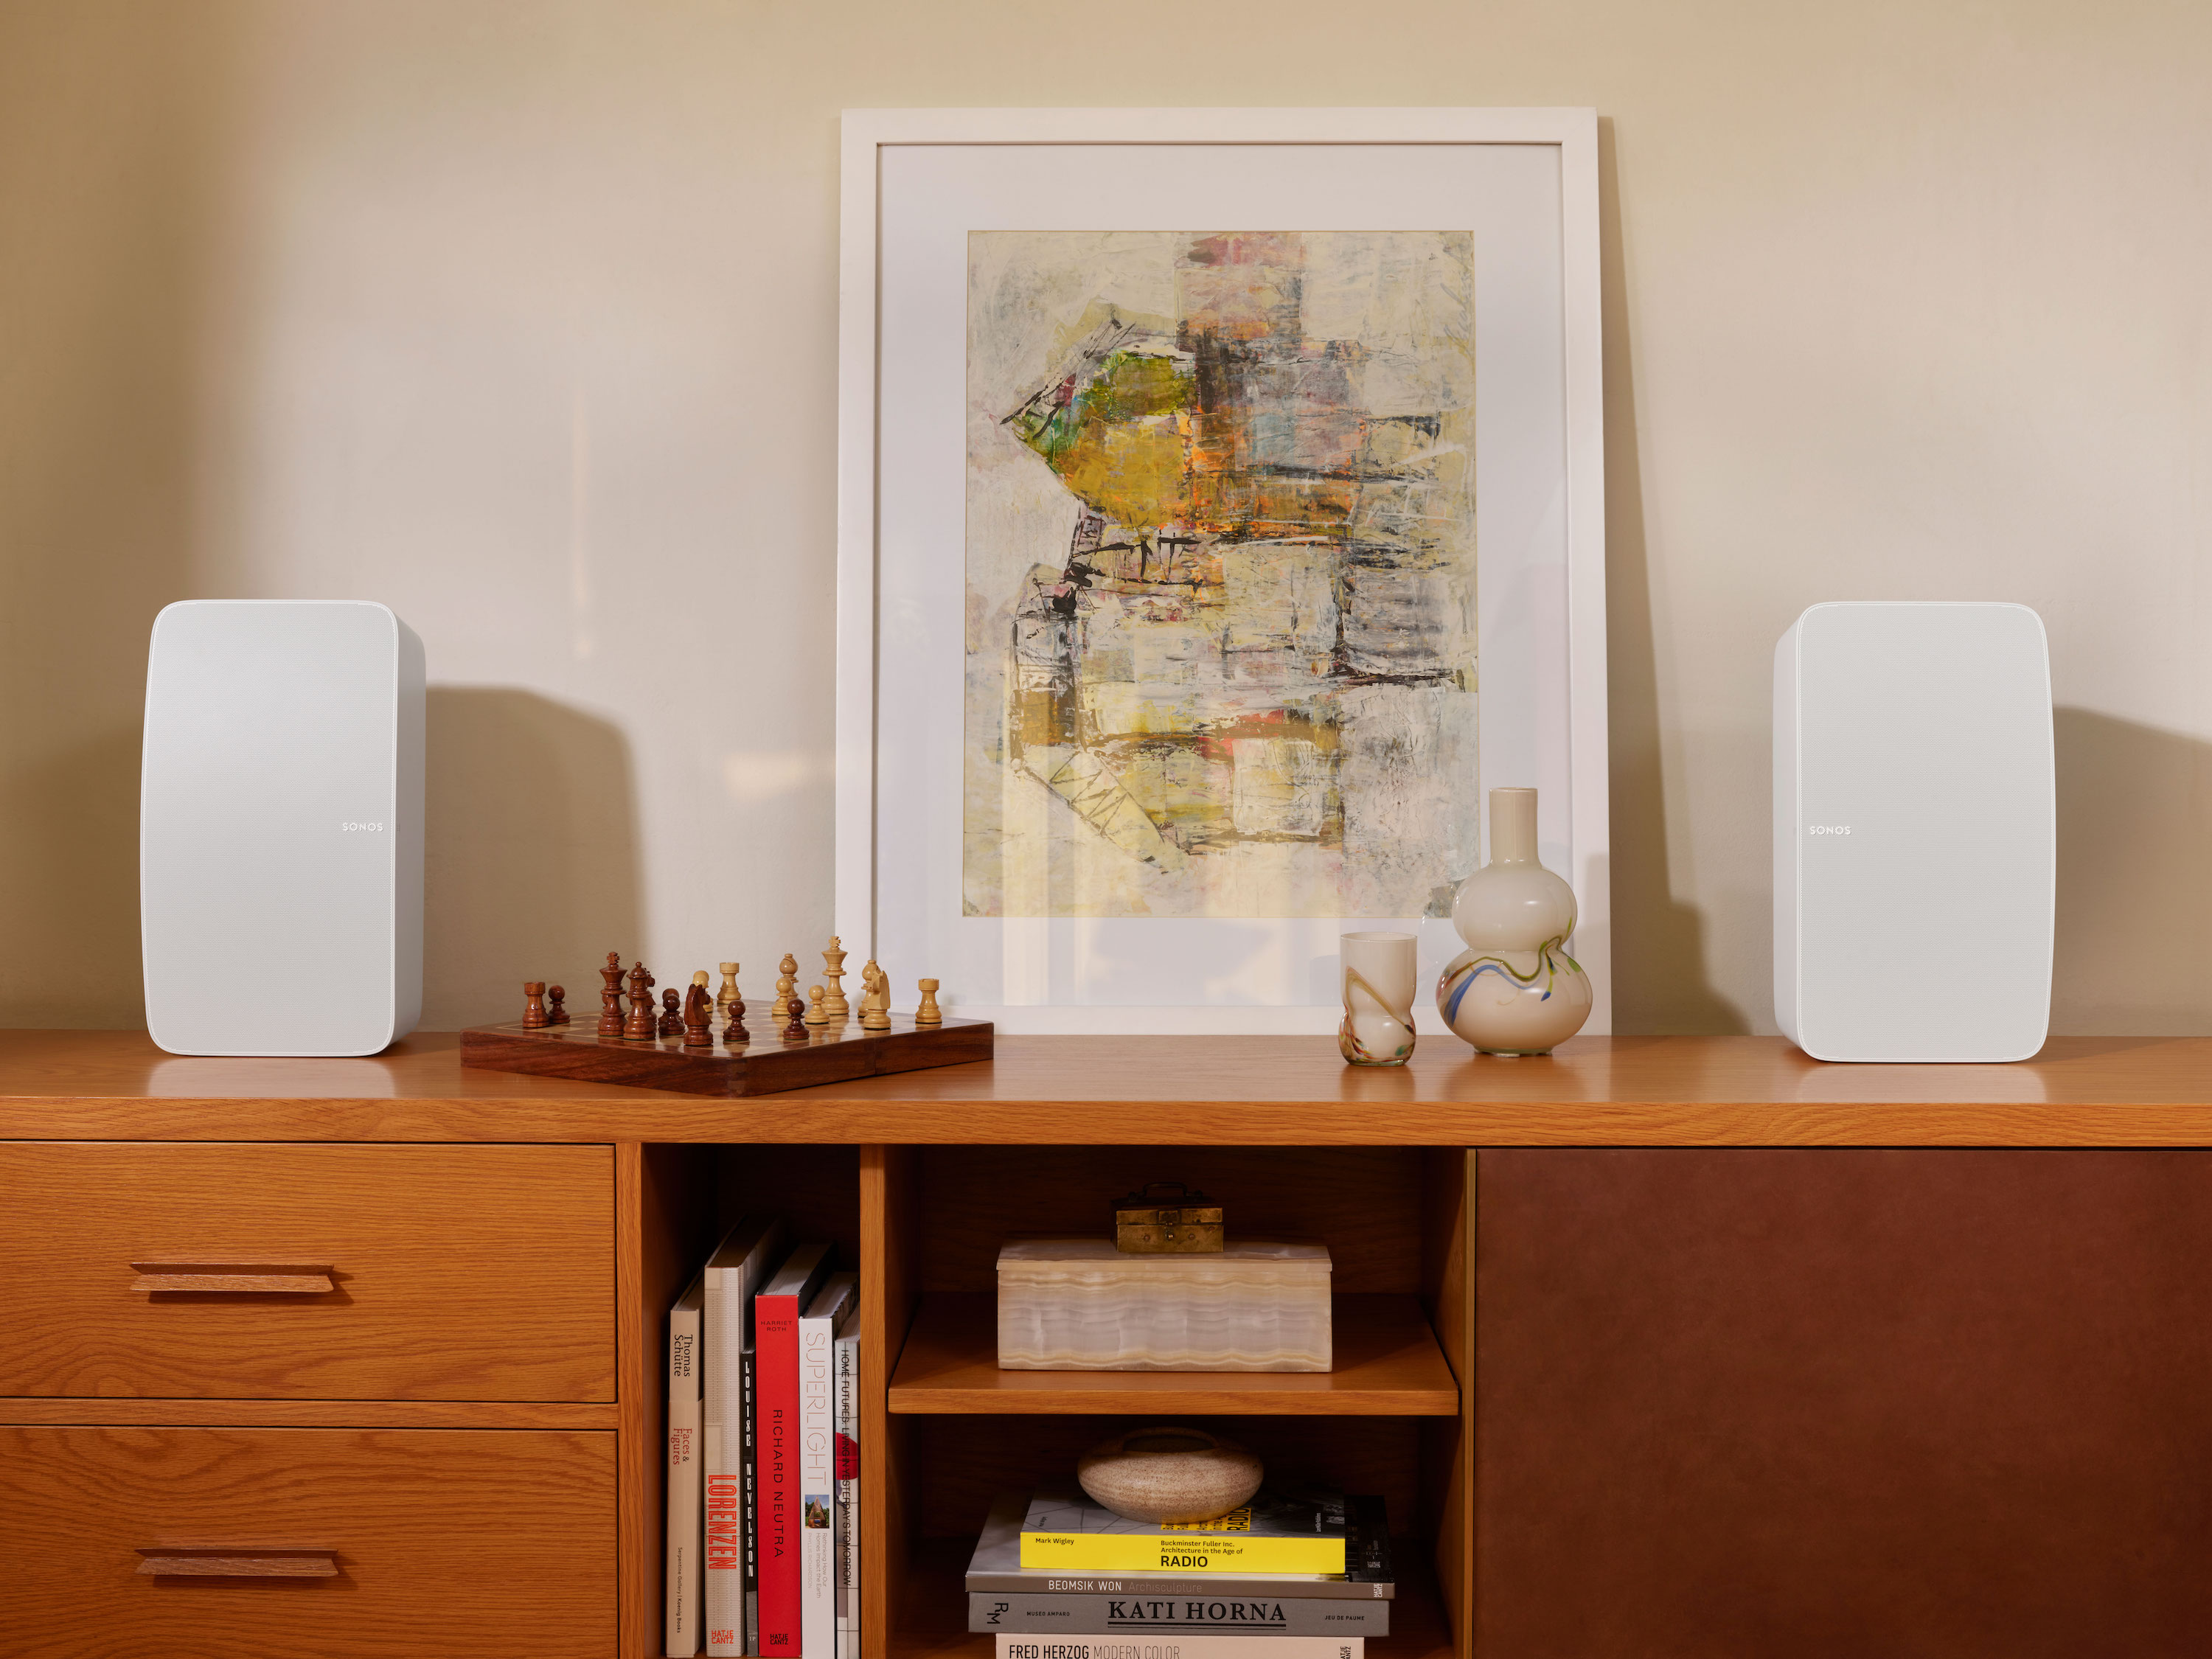 Sonos is reportedly developing a speaker that can beam sound in almost all directions